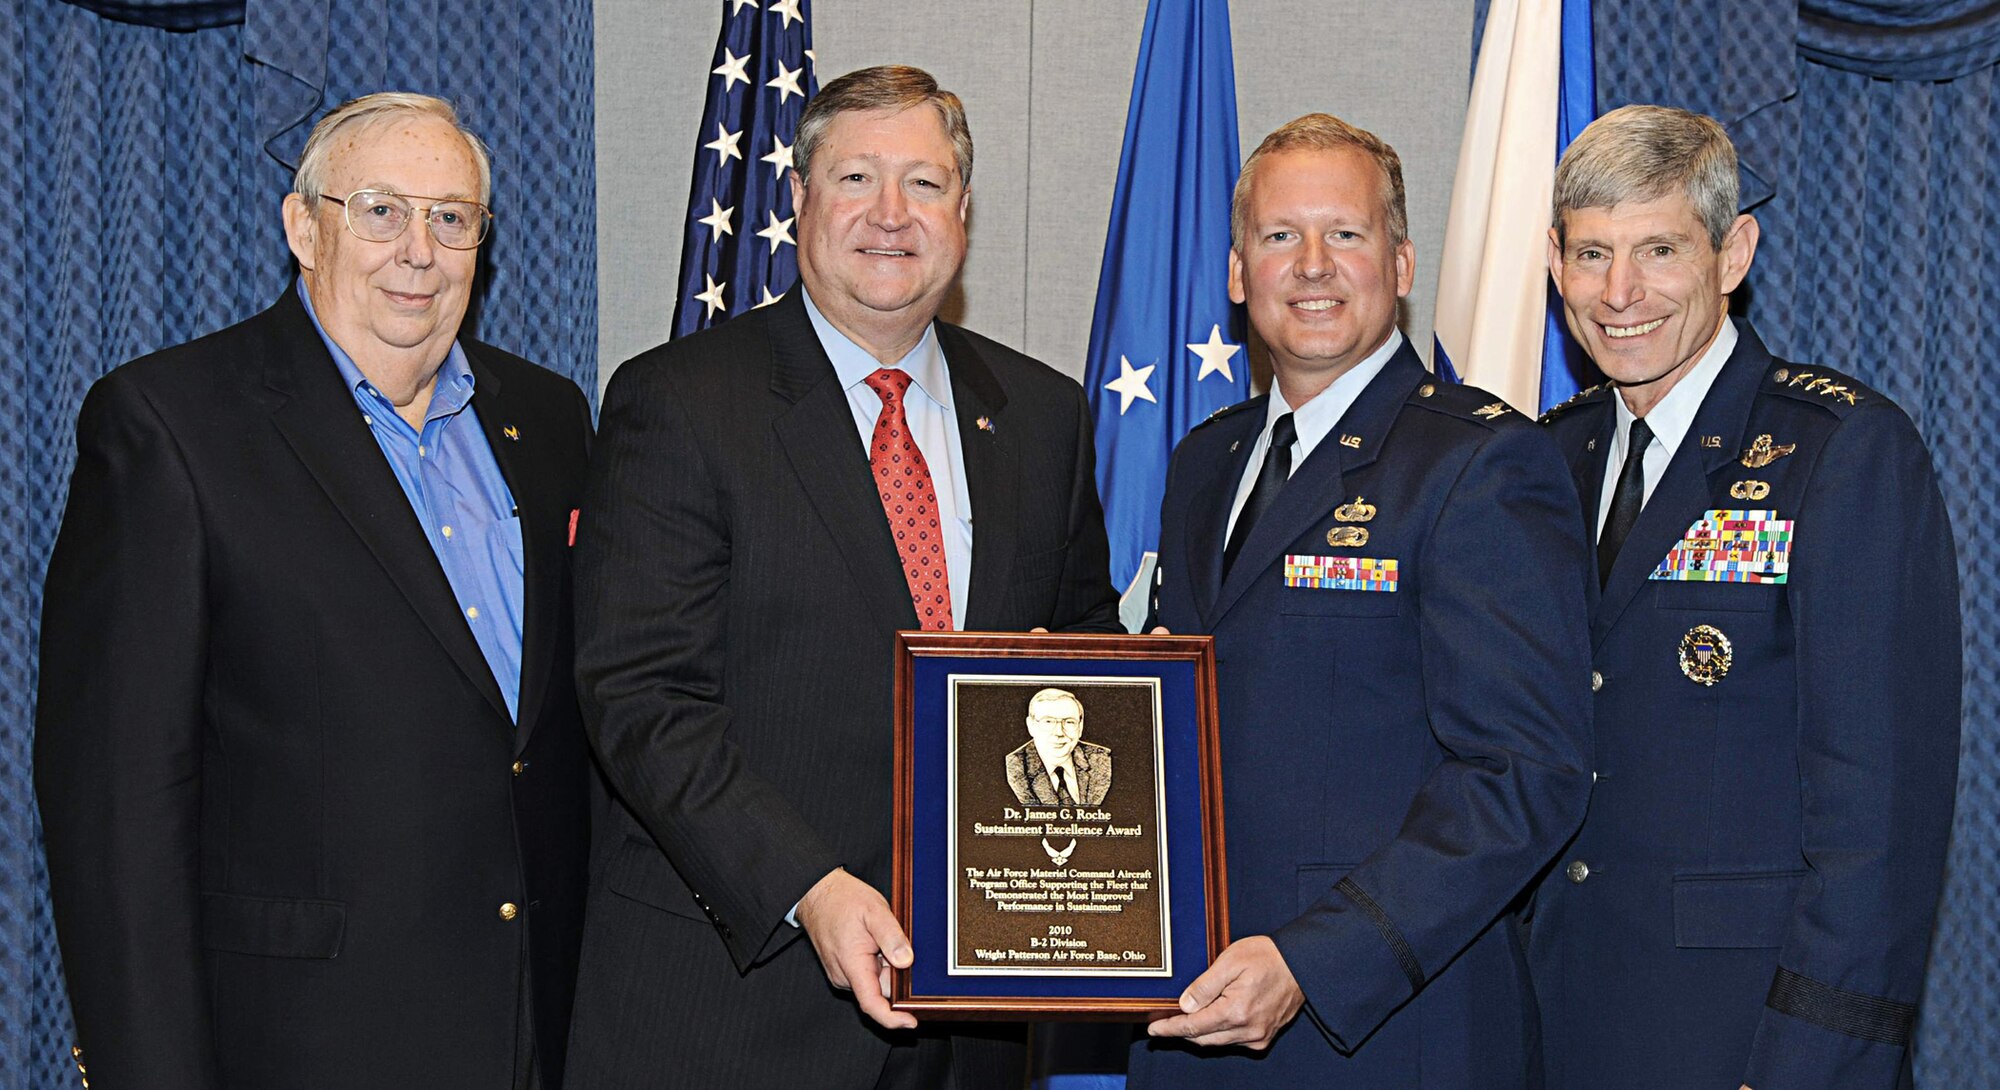 From left, former Secretary of the Air Force Dr. James G. Roche; current Secretary of the Air Force Michael B. Donley; Col. Mark Williams, Chief of the
B-2 Division at Wright-Patterson Air Force Base, Ohio; and Air Force Chief of Staff Gen. Norton Schwartz pose for a photograph following the 2010 Dr. James G. Roche Sustainment Excellence Award ceremony at the Pentagon on April 11, 2011.  Colonel Williams represented all the members of the B-2 Spirit division, which won the award for demonstrating the most improved performance in aircraft maintenance and logistics readiness.  (U.S. Air Force photo/Andy Morataya)
